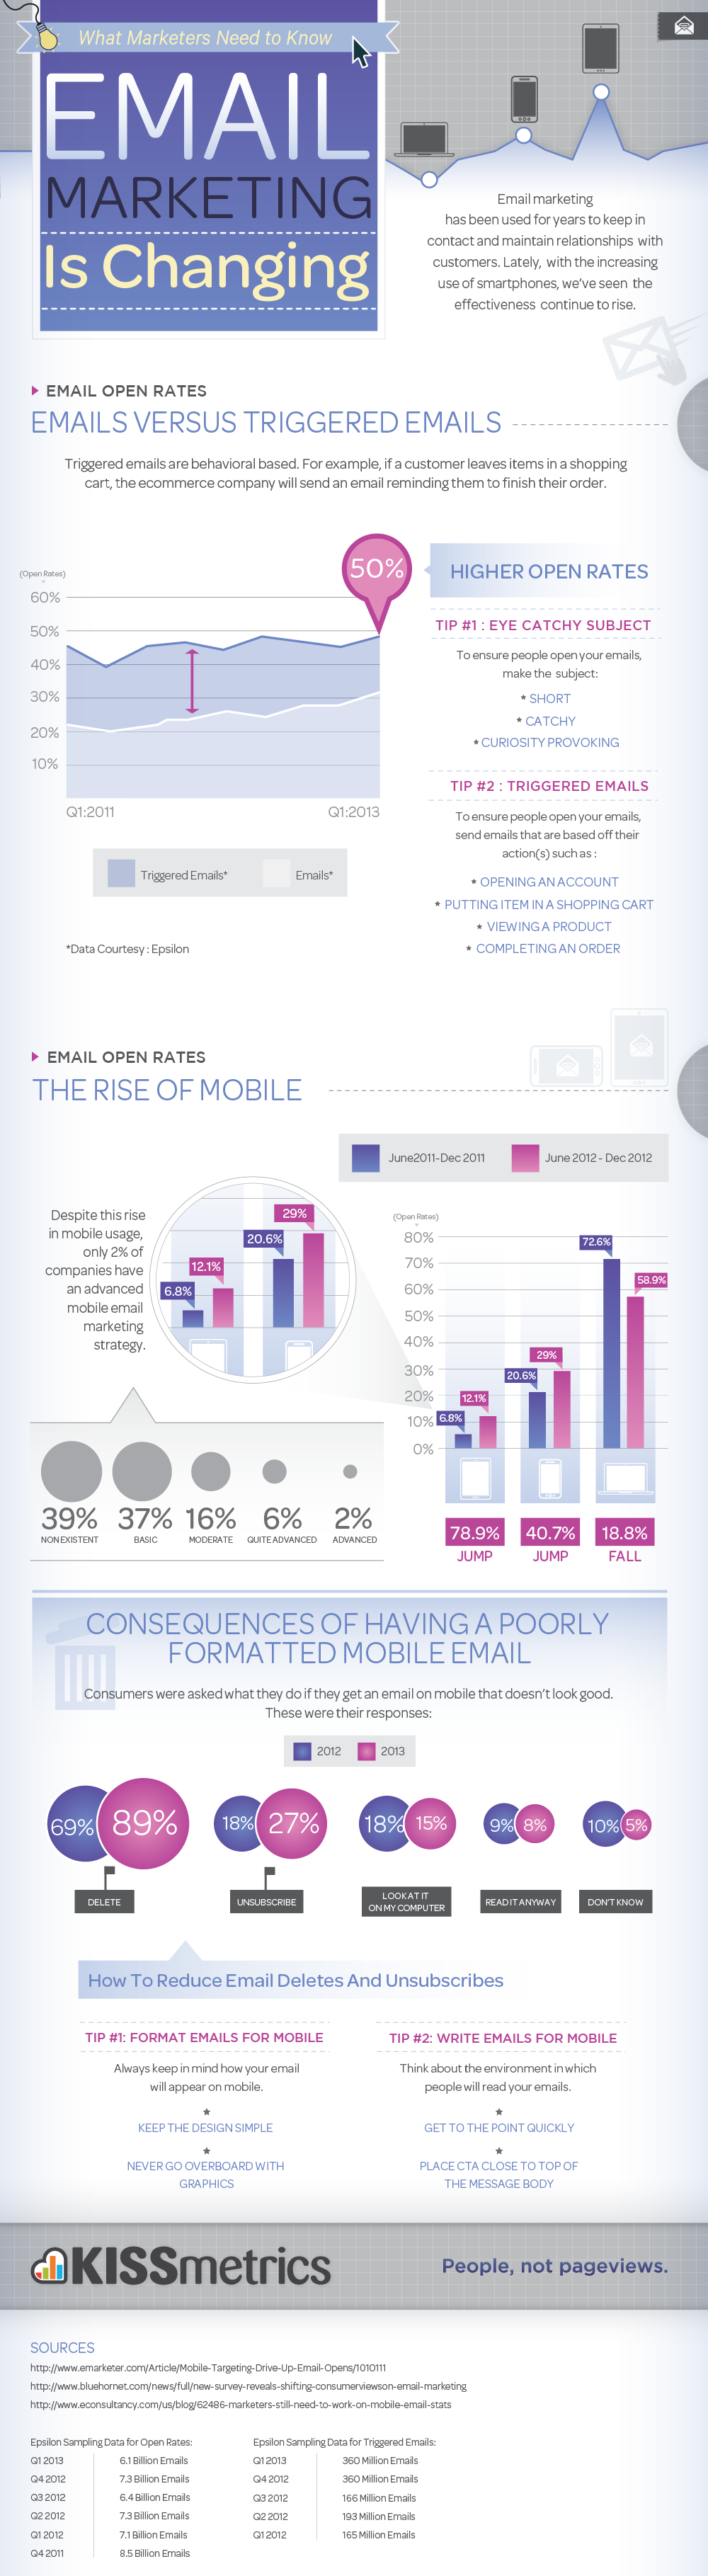 Infographic: Email Marketing is Changing – The Rise of Mobile and Triggered Emails